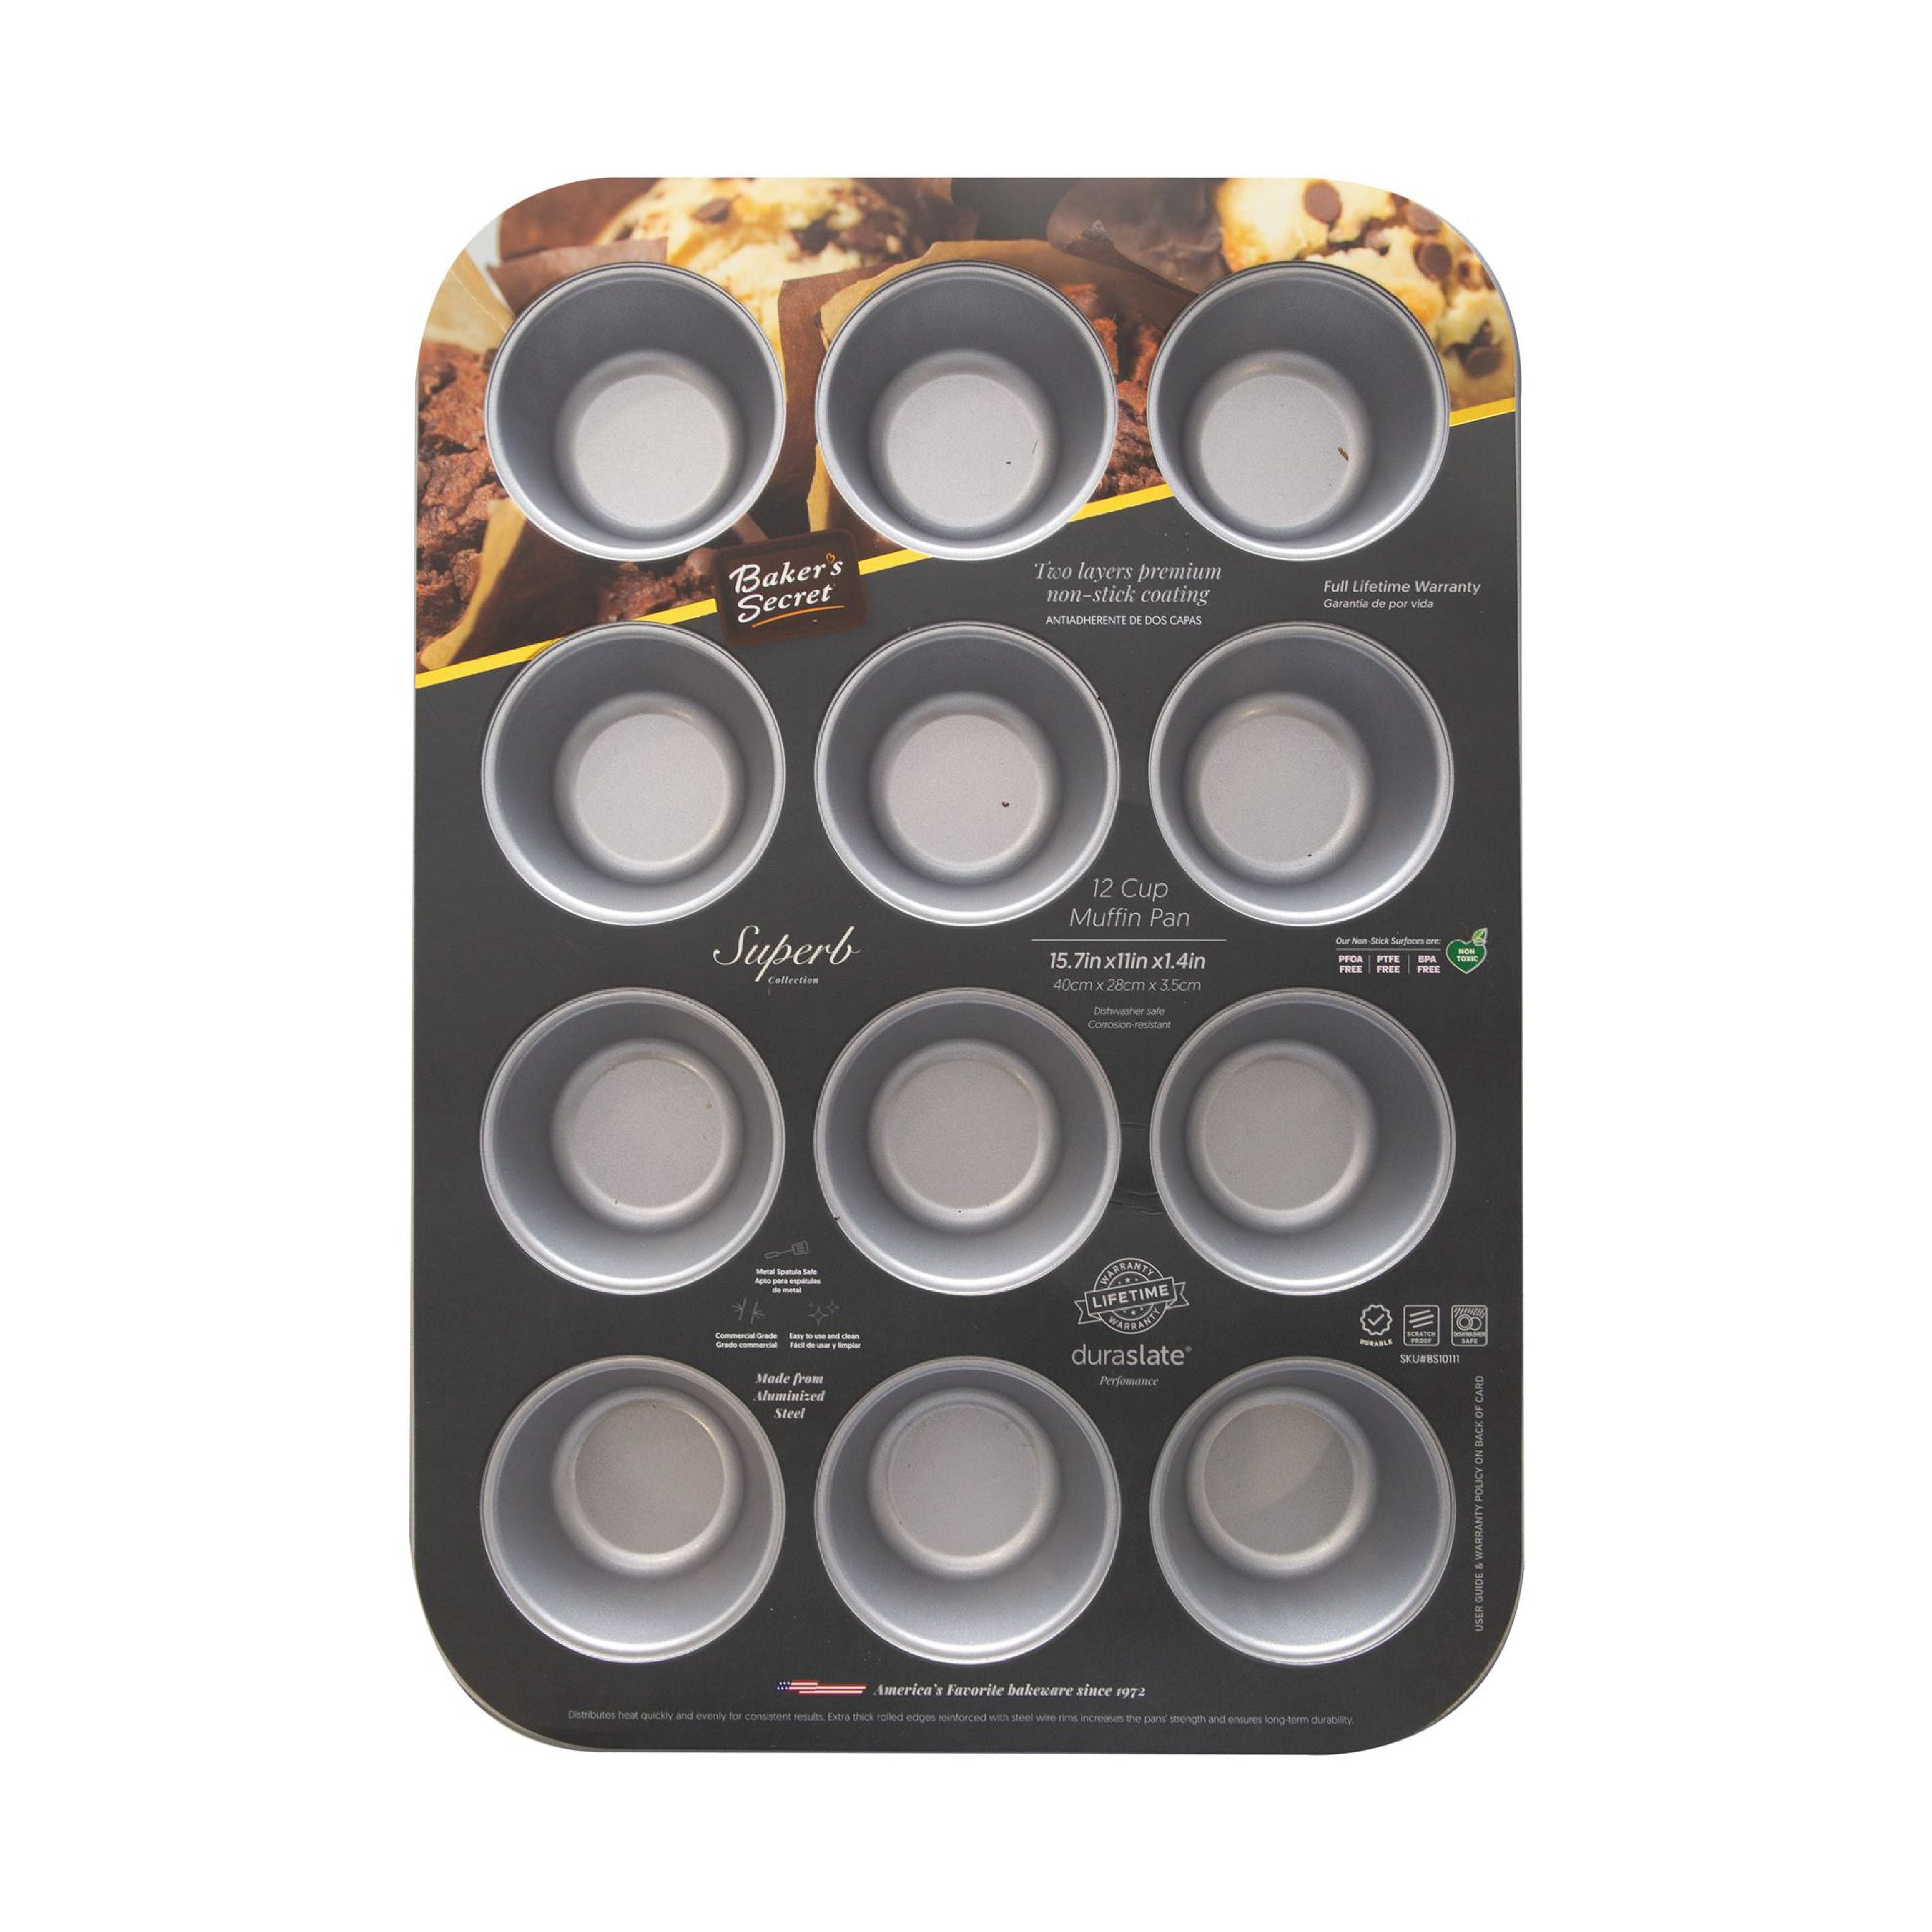 Alegacy 2043 24 Cup Muffin Pan